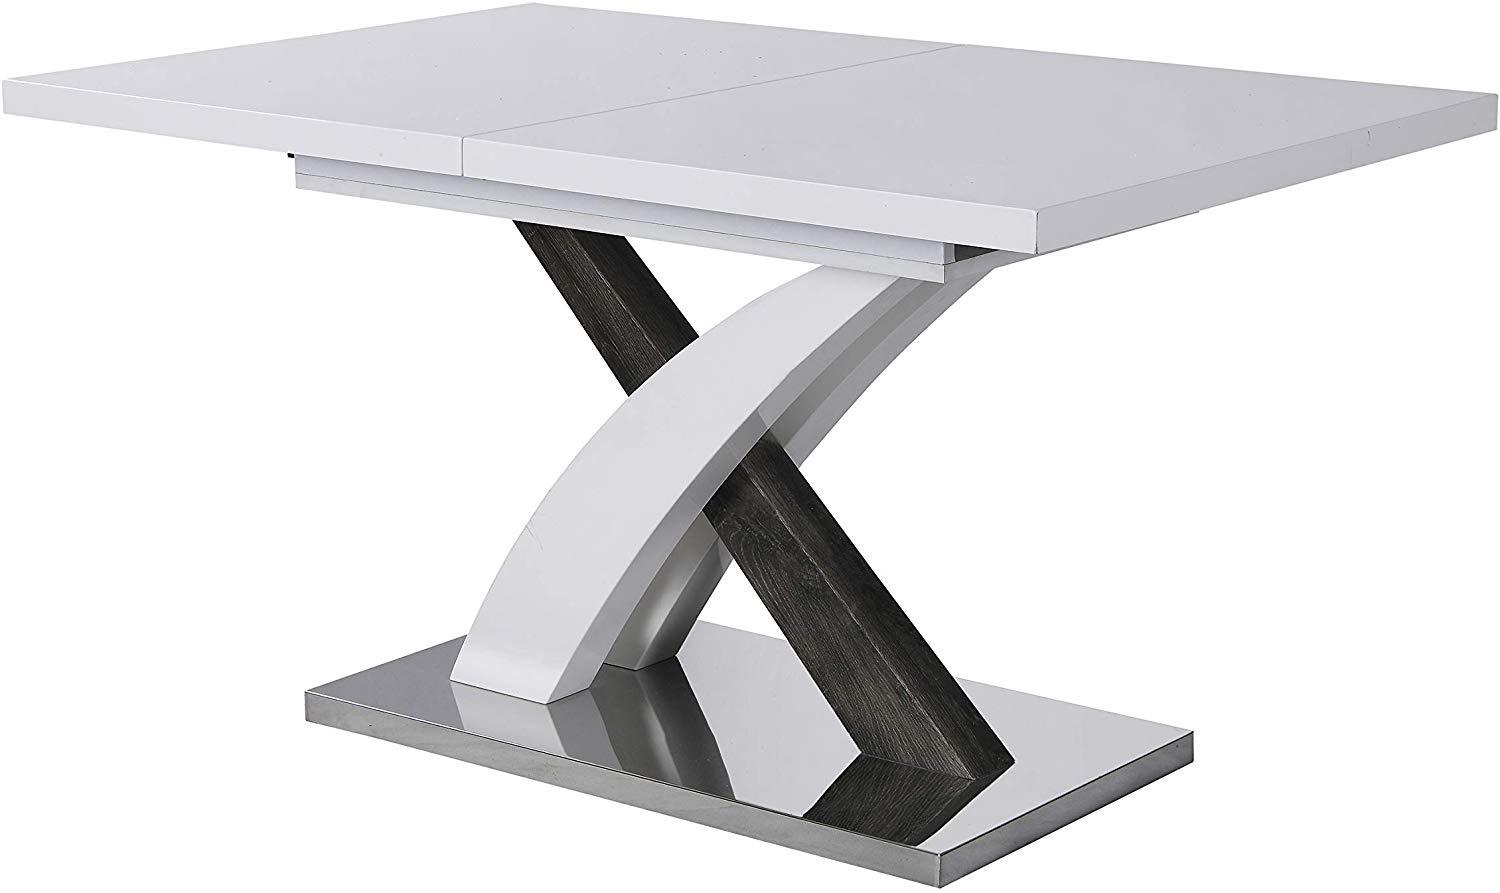 BASEL High Gloss White Extendable Dining Table 6 to 8-Seater with Stainless Steel Base